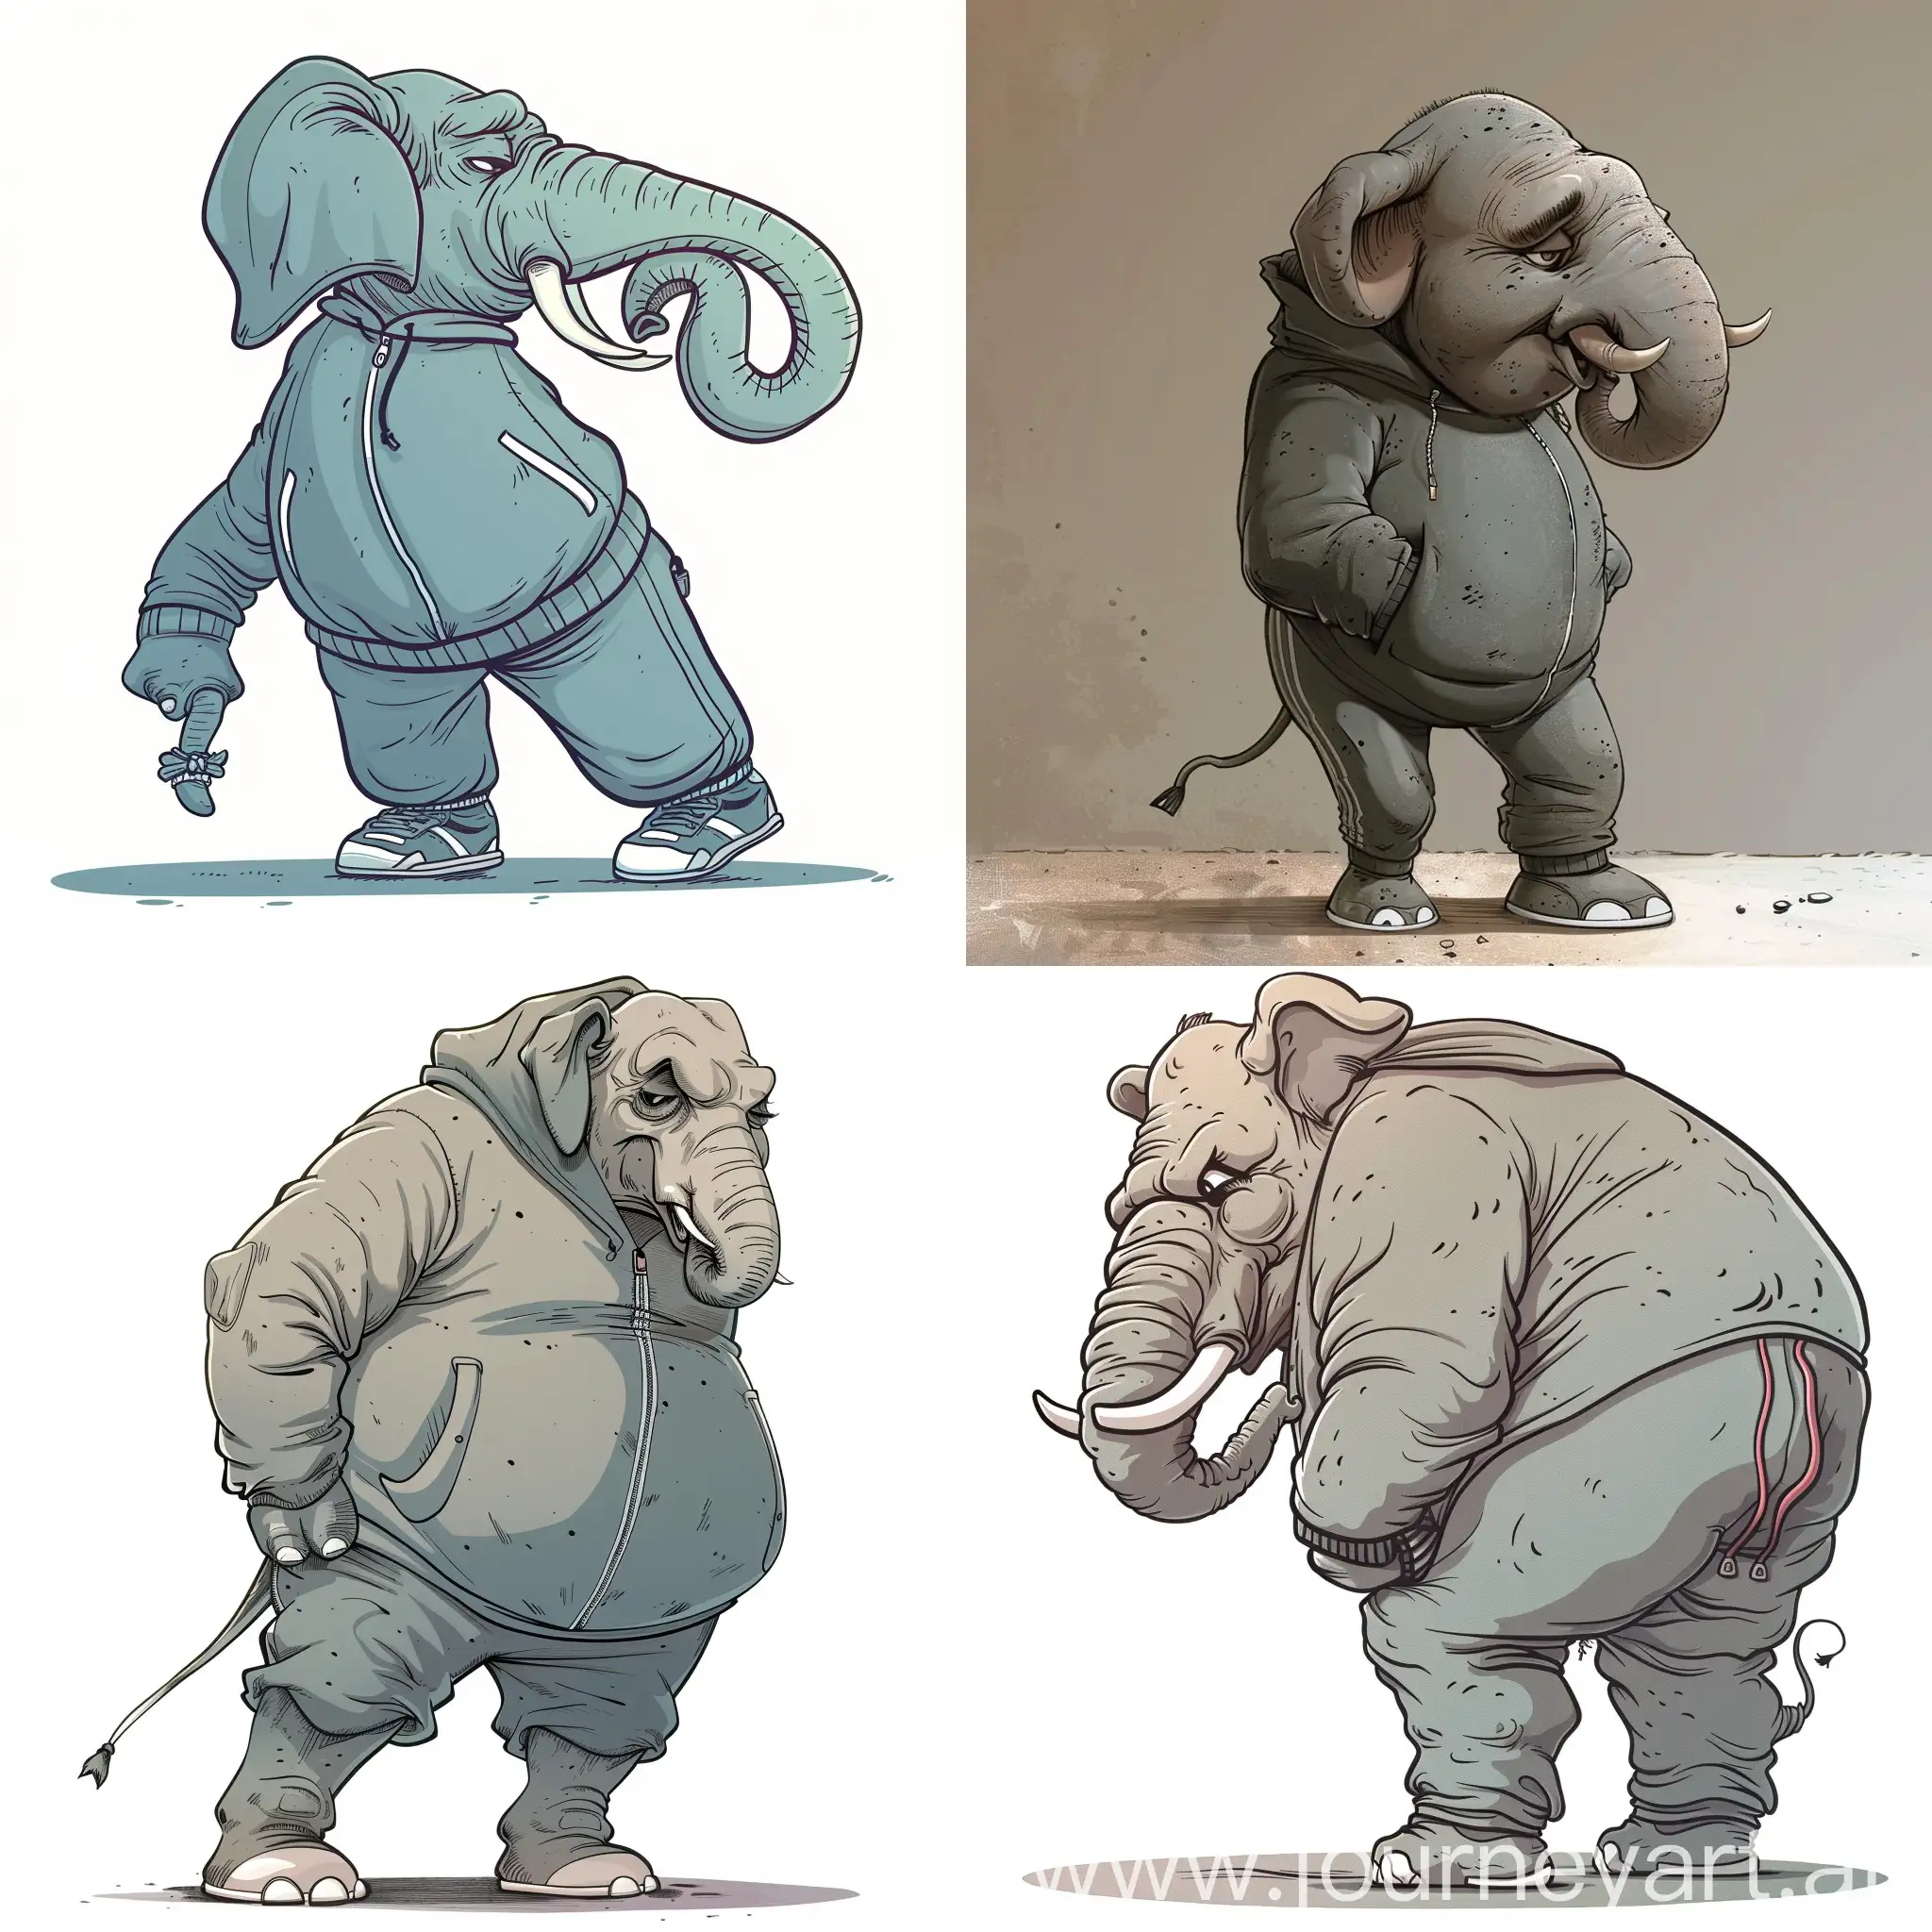 the cartoon elephant stands sideways and tries to put on a tracksuit, but the suit does not fit on the leg and the elephant gets upset